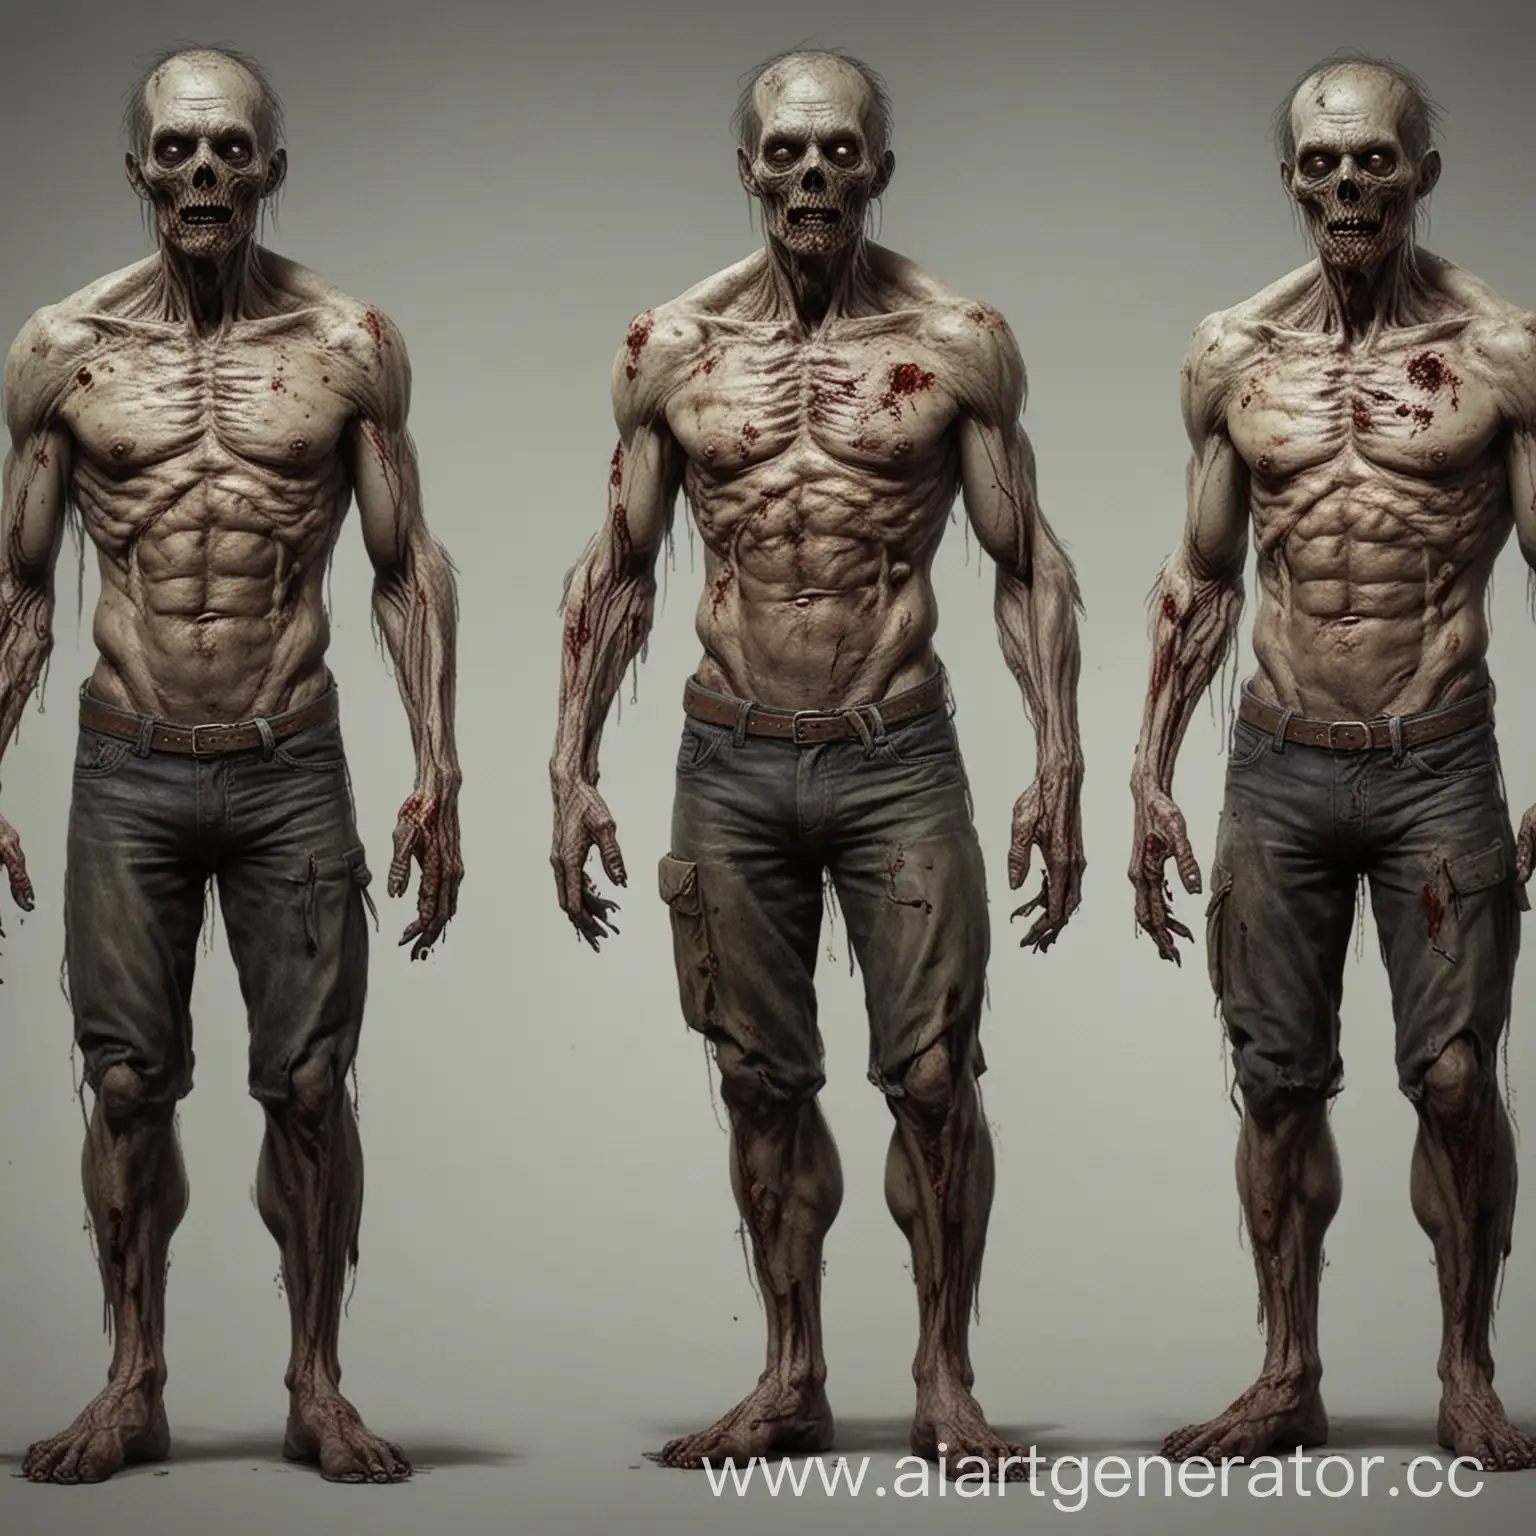 FullLength-Russian-Zombie-Front-and-Back-Views-Illustration